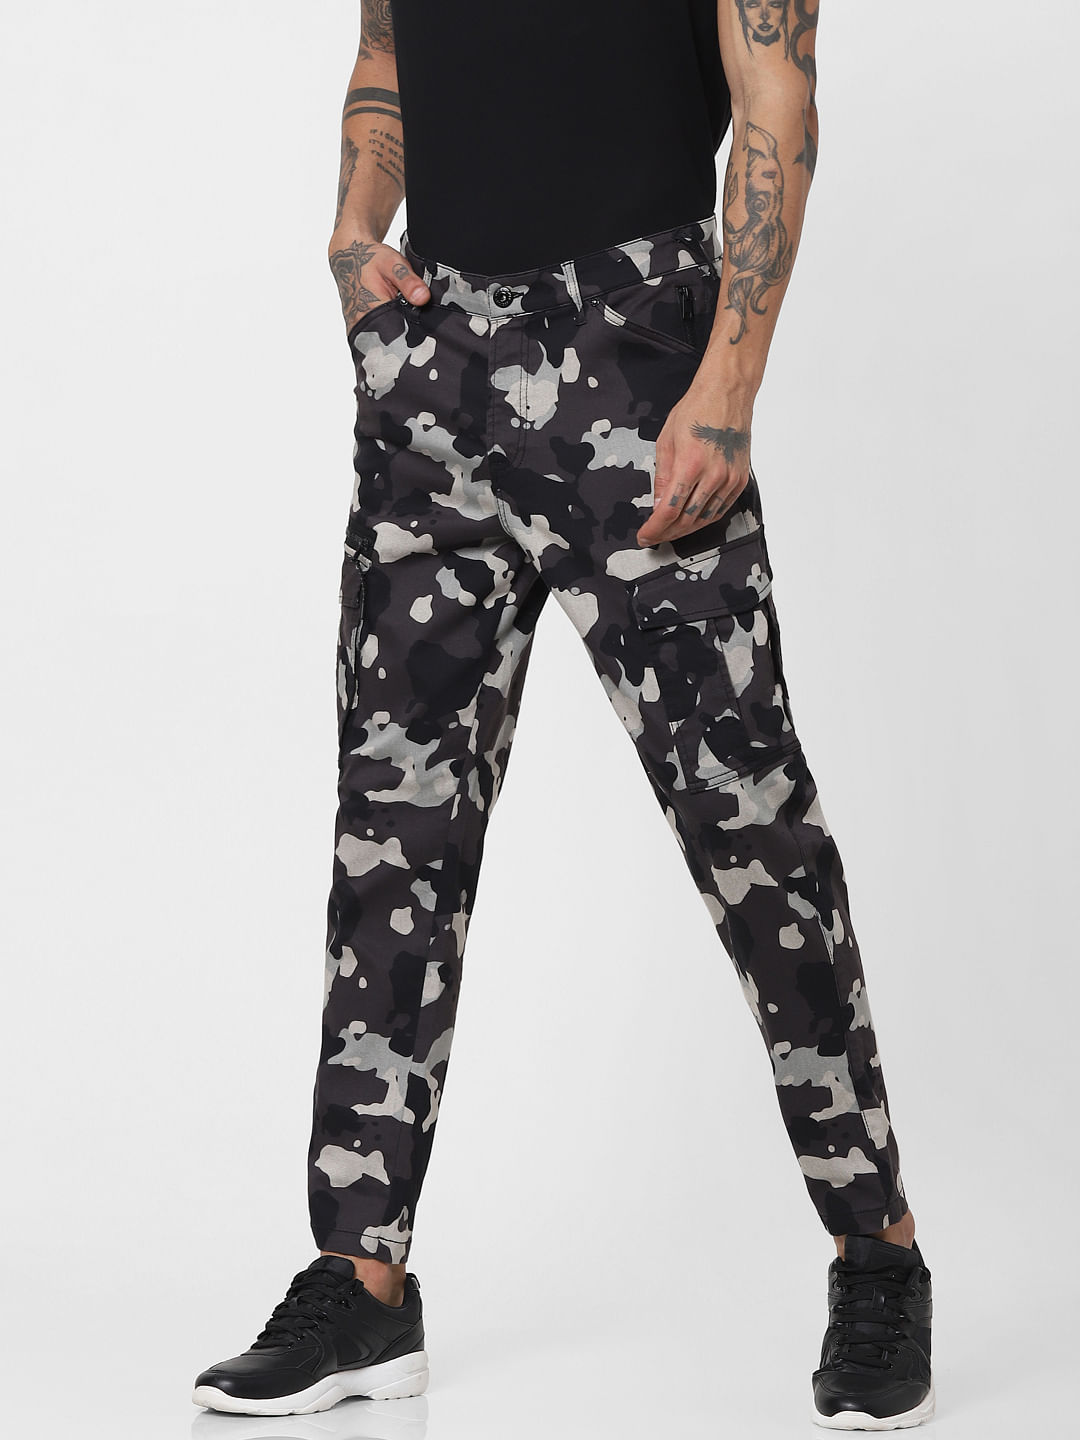 Camouflage Cargo Trousers For Men Loose Fit